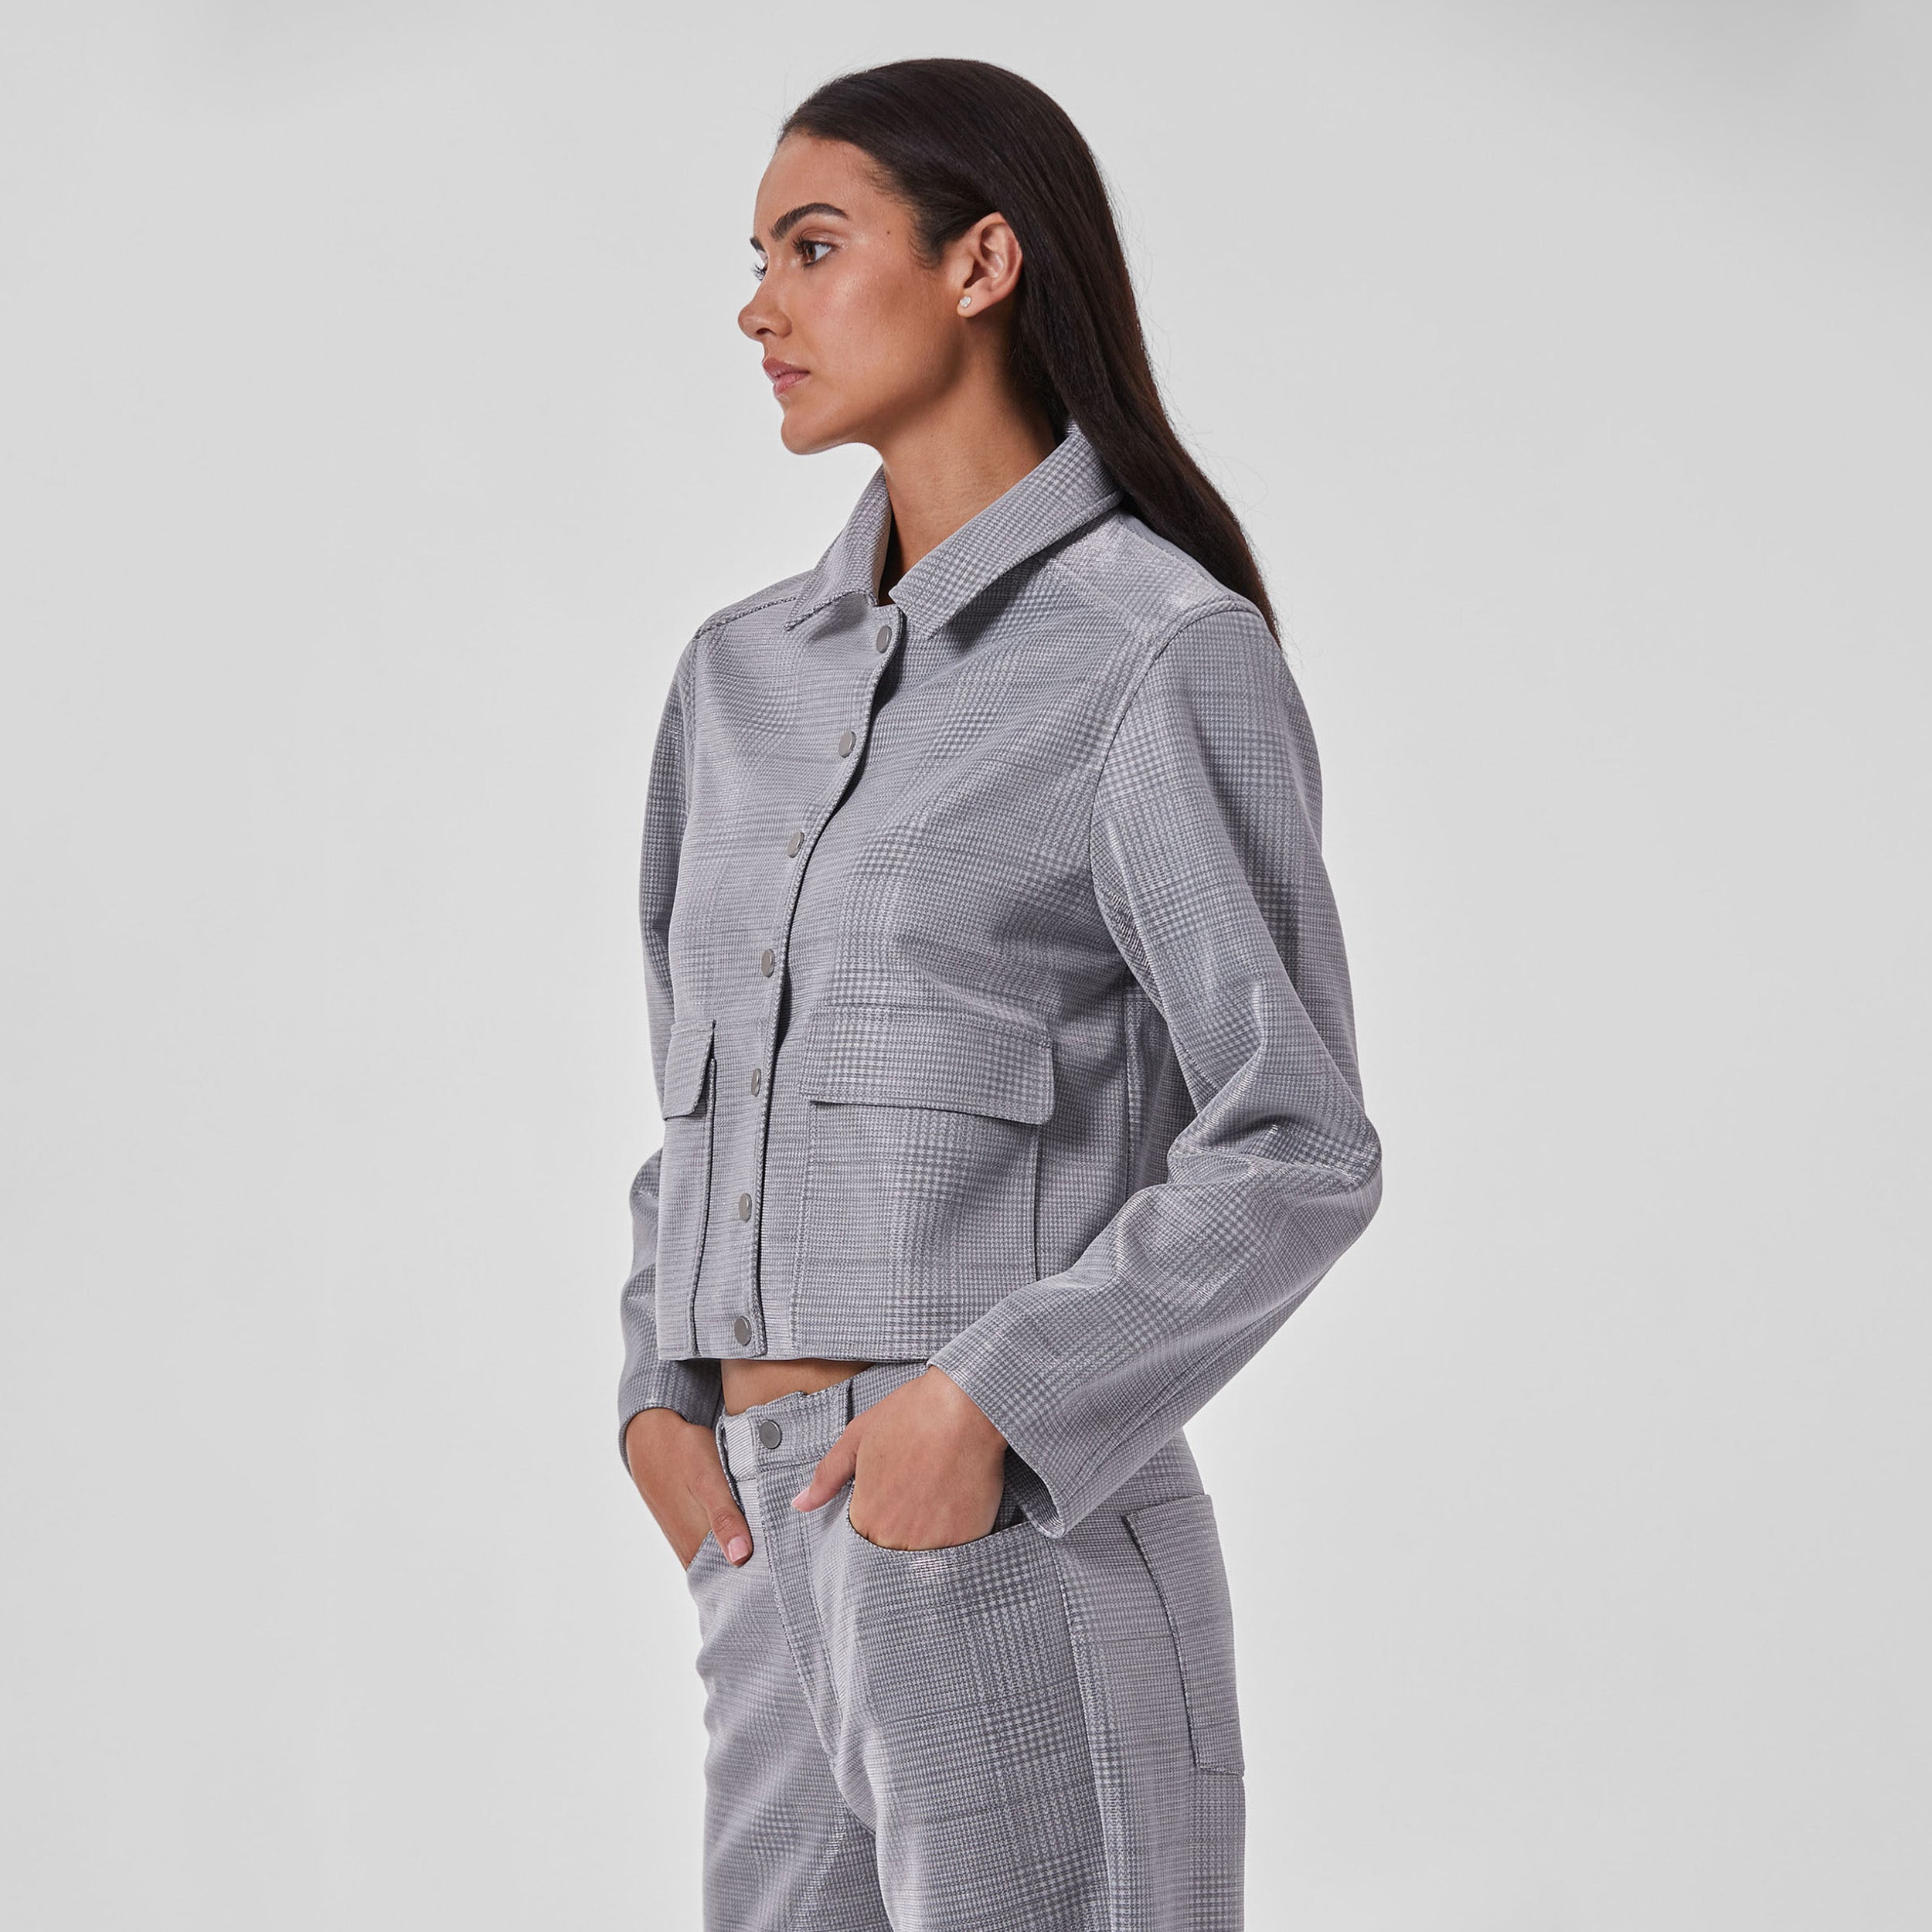 Side profile of woman wearing silver plaid patterned cropped jacket and matching pants.